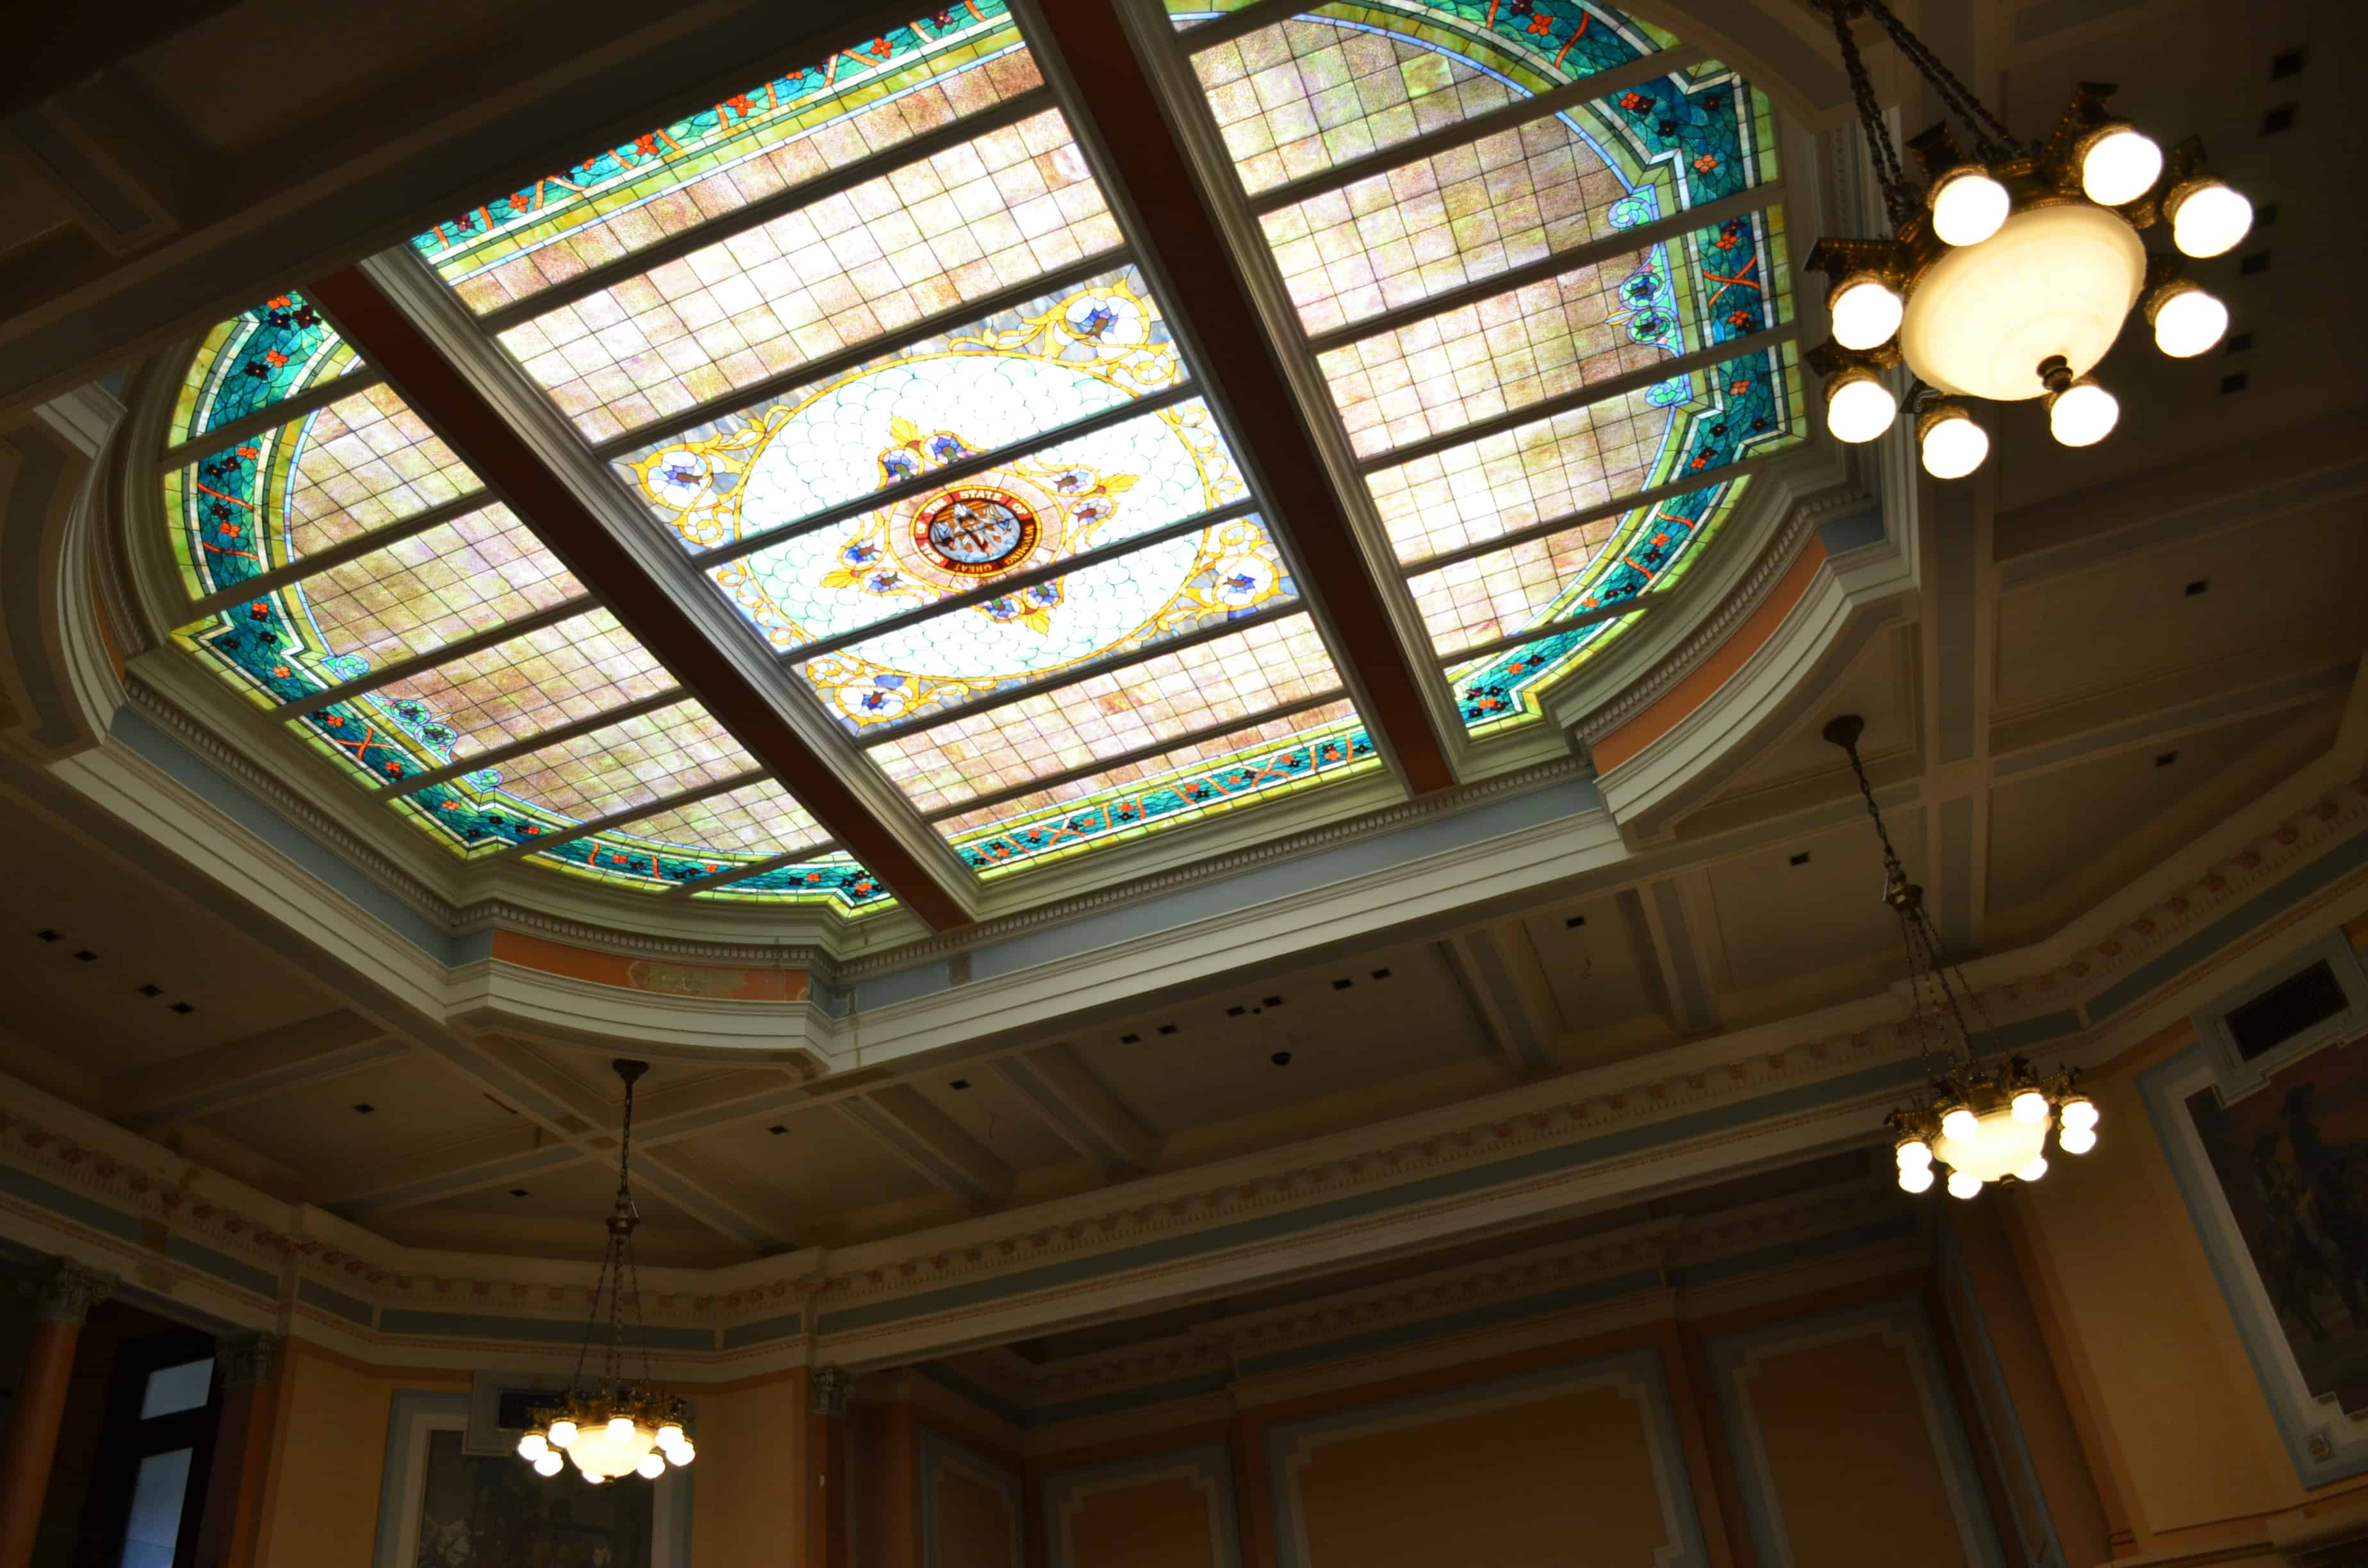 Stained glass ceiling in the House Chamber at the Wyoming State Capitol in Cheyenne